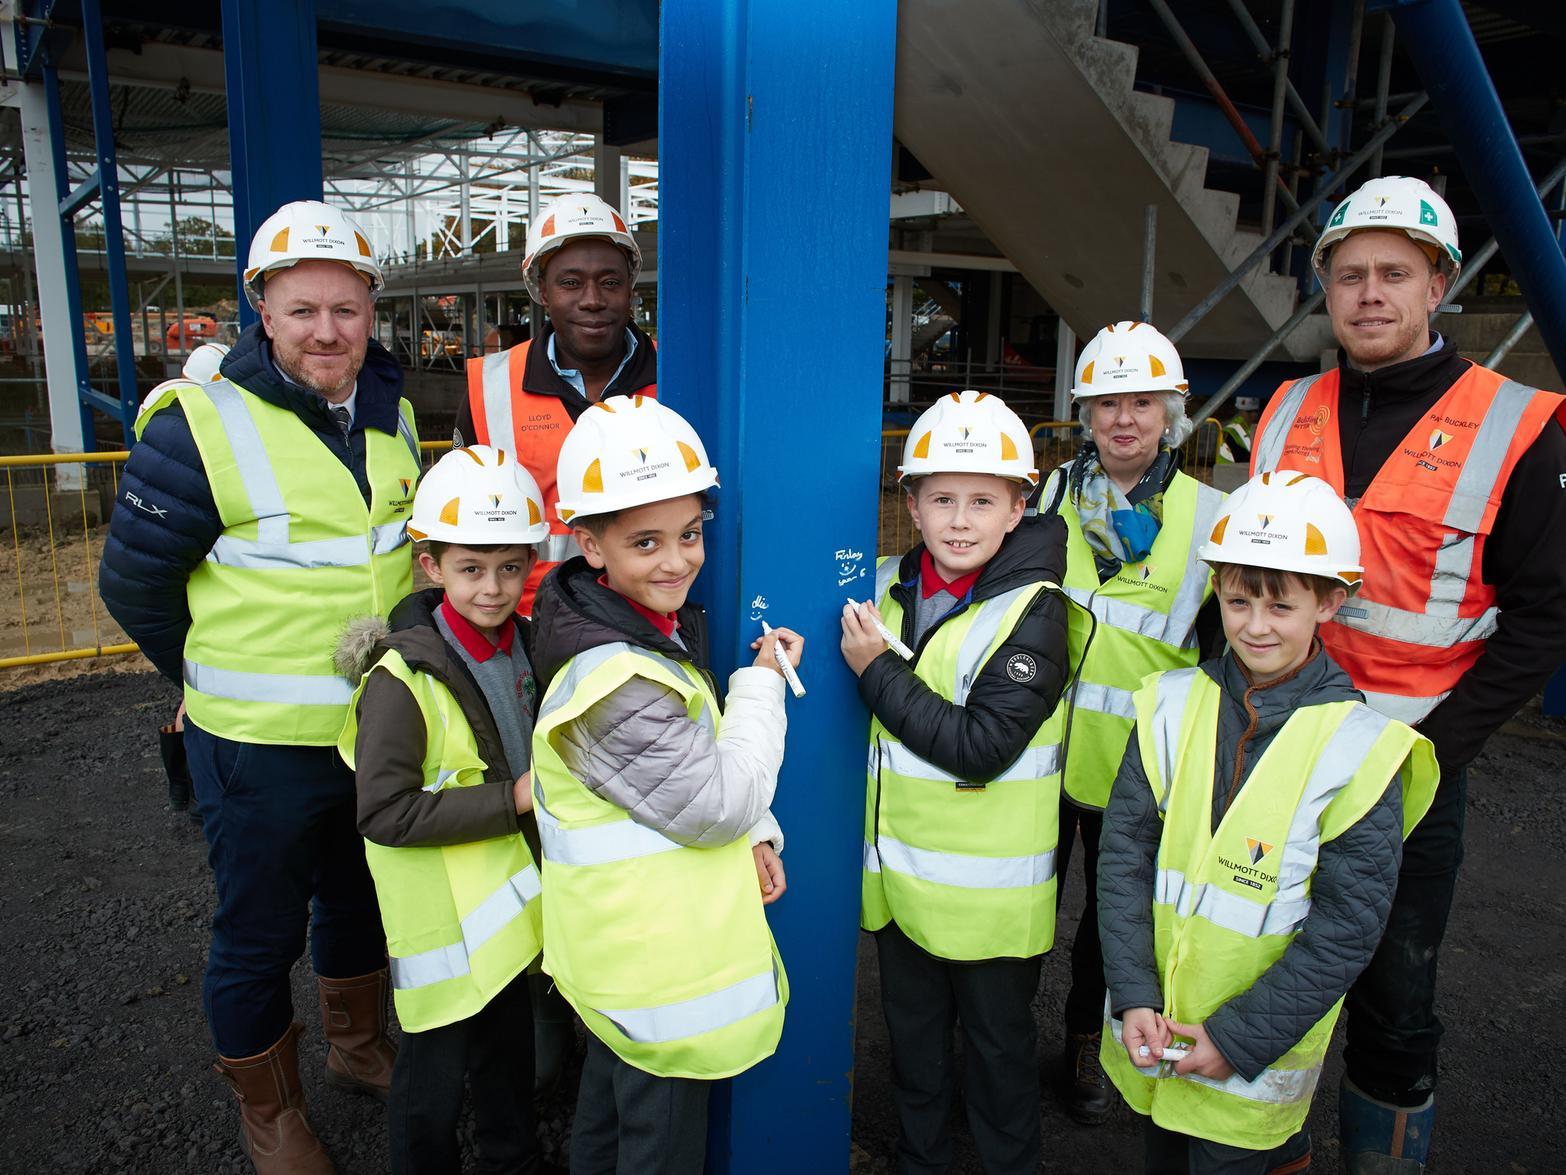 As construction continued, more than 30 pupils from St Giles C of E Academy were invited to visit the site, where they were offered the opportunity to sign their names onto the building's foundations.